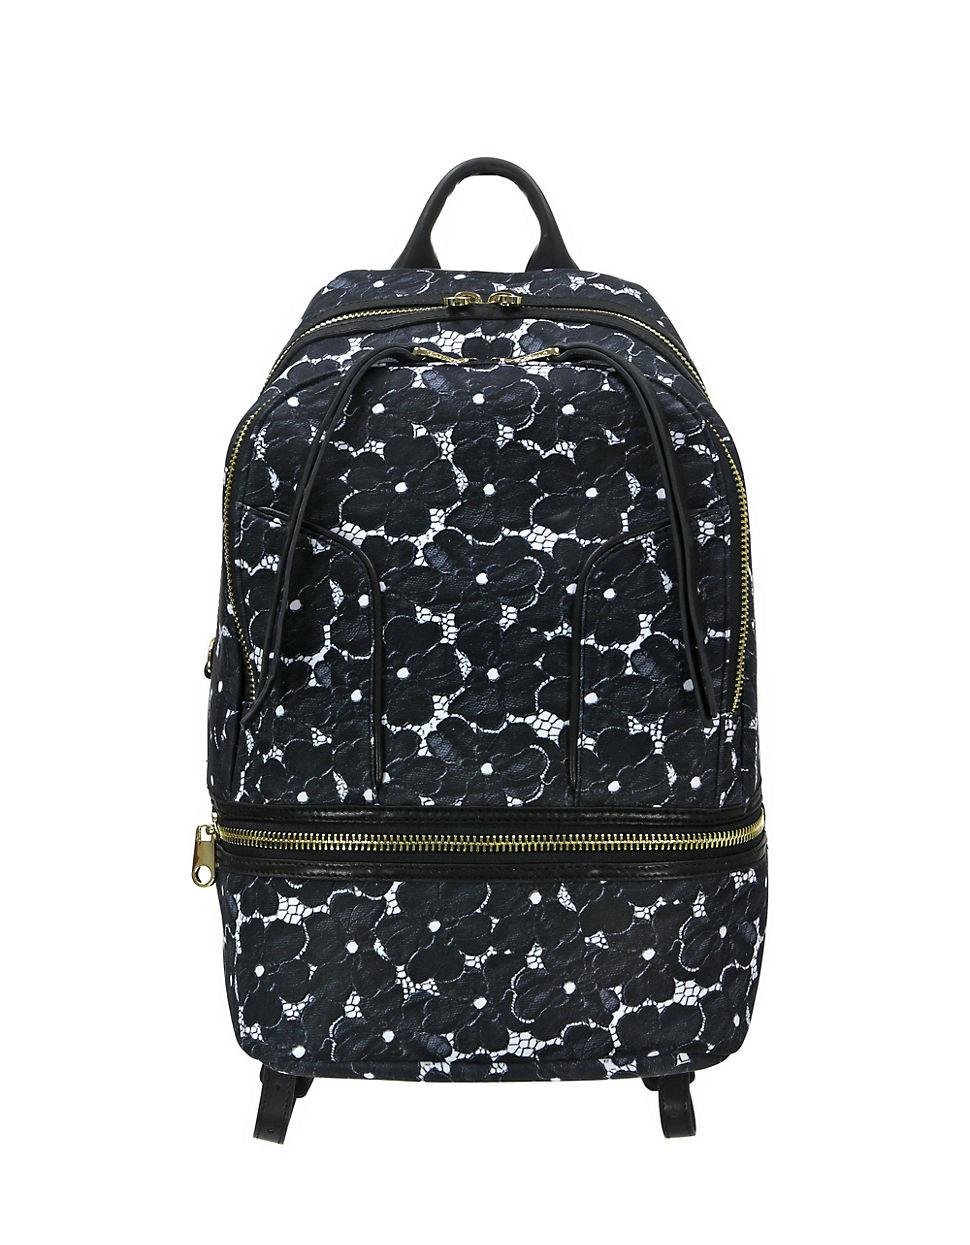 Cynthia rowley Brody Lace Backpack in Black (Black Lace) | Lyst